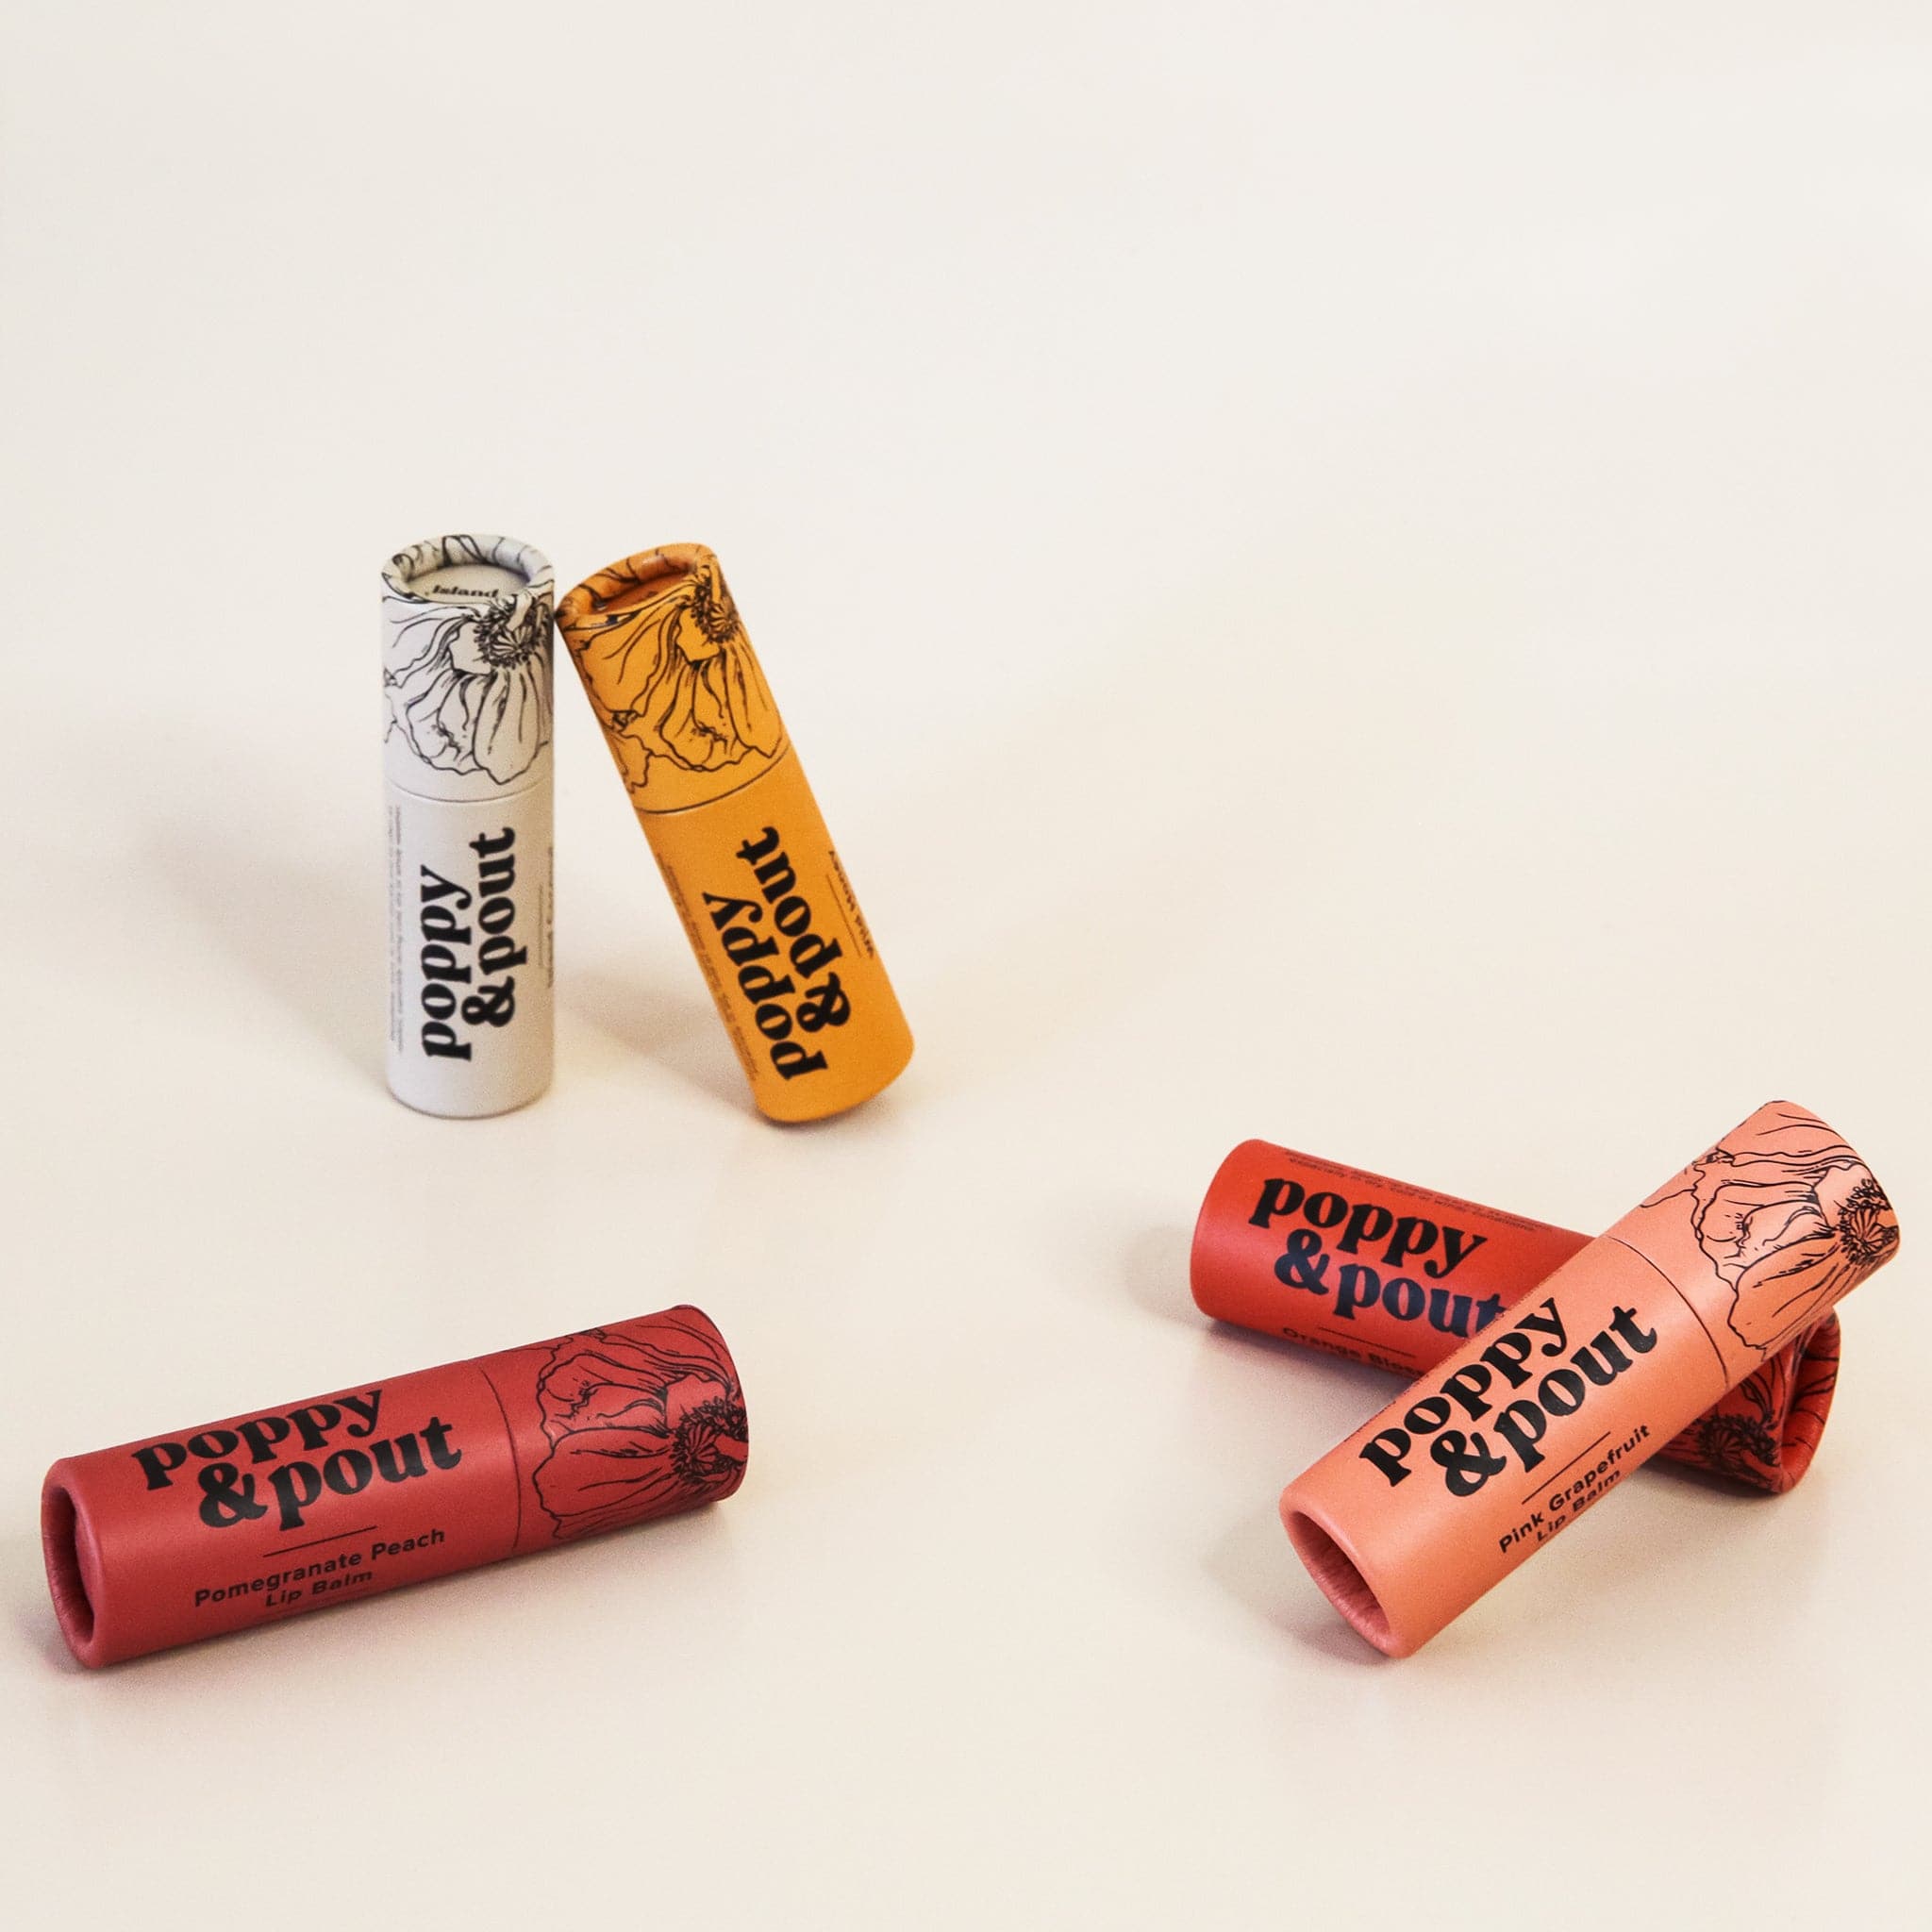 In front of a white background is five tubes. Each tube has a black drawing of a black flower on the top end and black text on the bottom that reads ‘poppy & pout.’ Starting from left the colors are bright orange red, peach, white, yellow and dark red. 